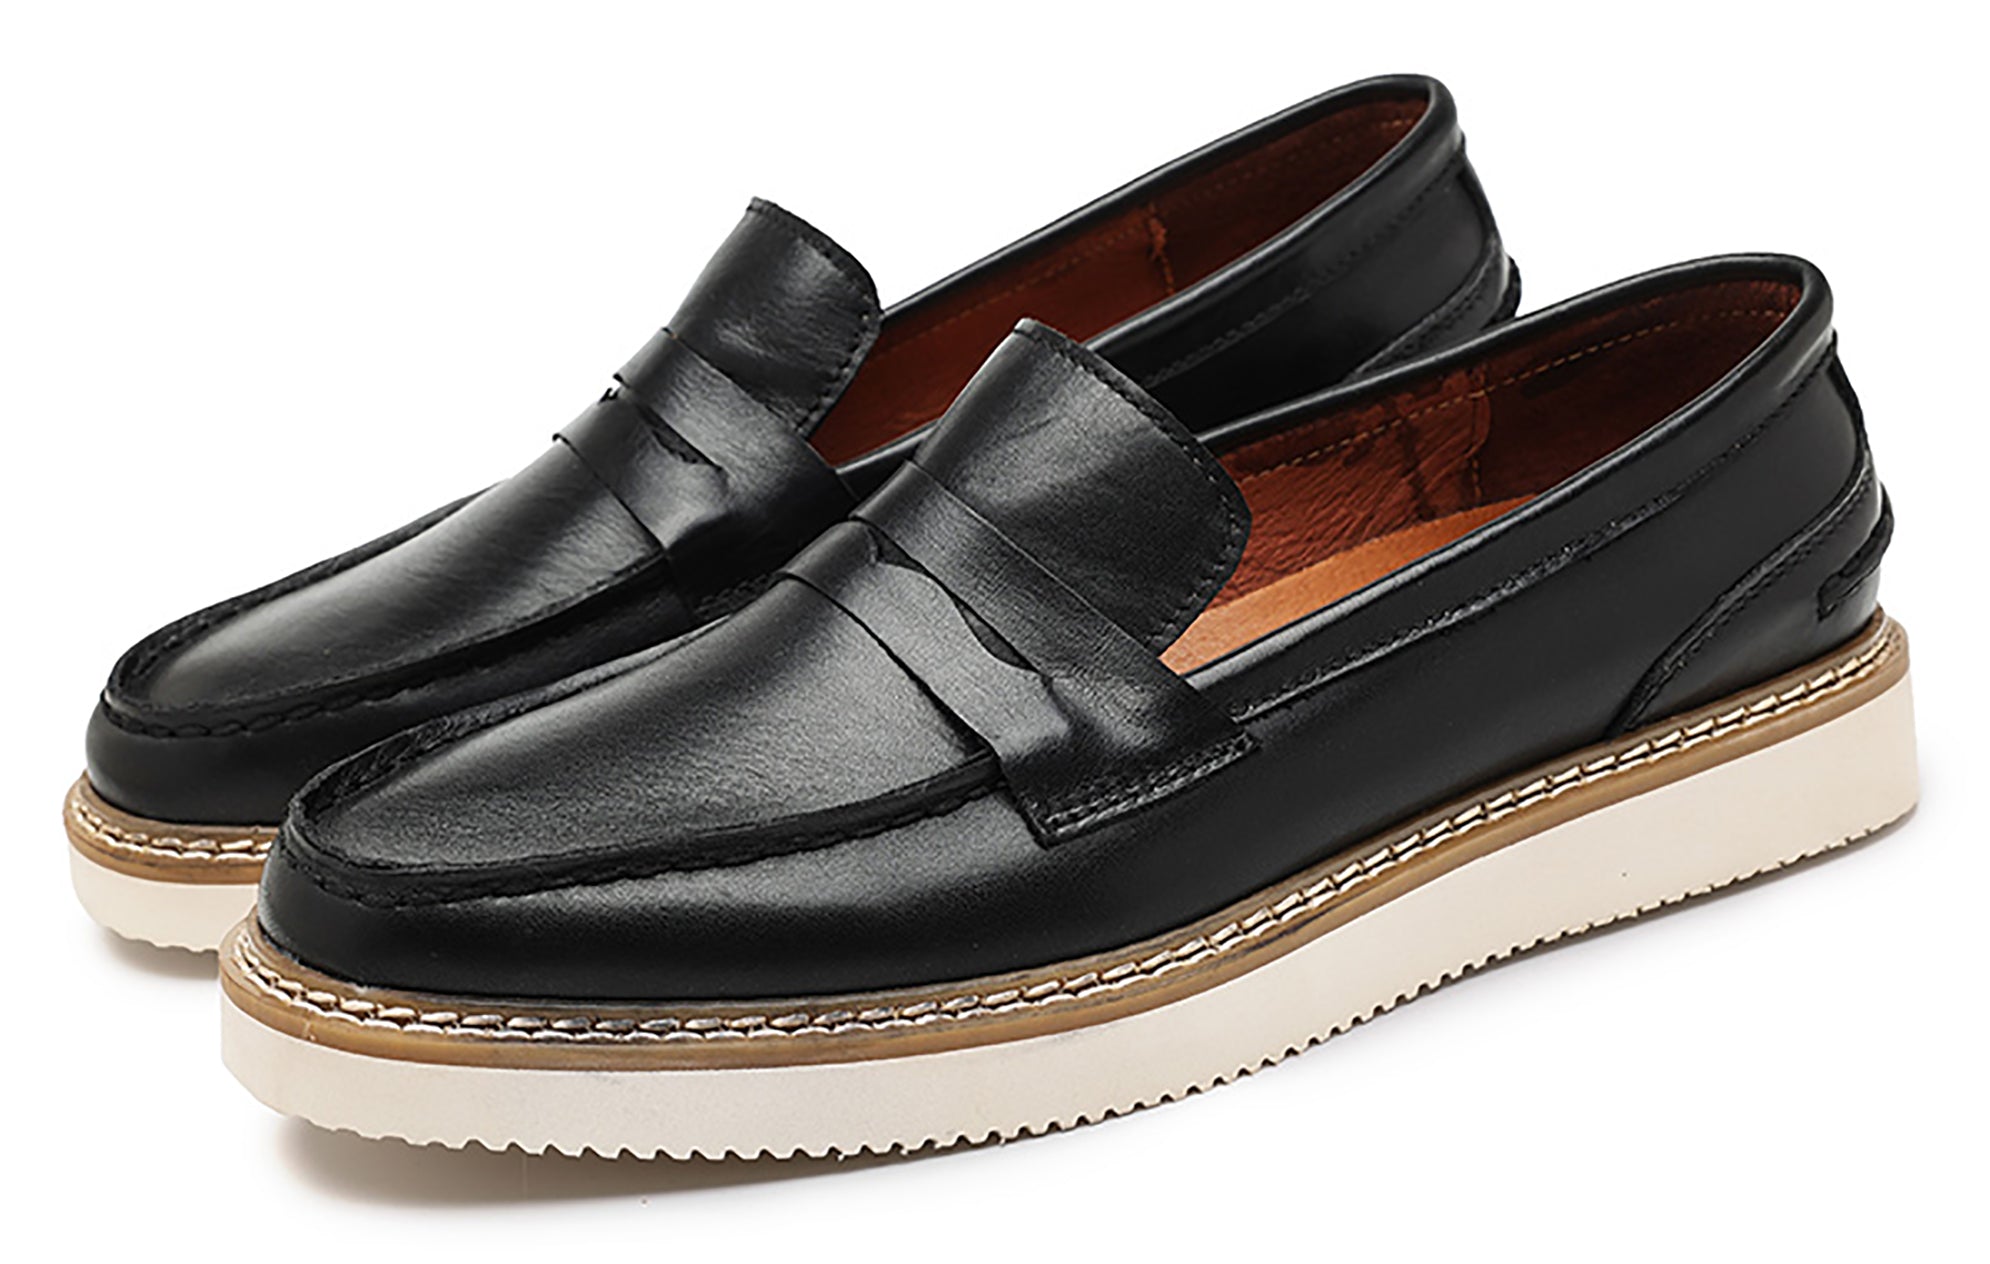 Men's Classic Genuine Leather Tuxedo Penny Loafers